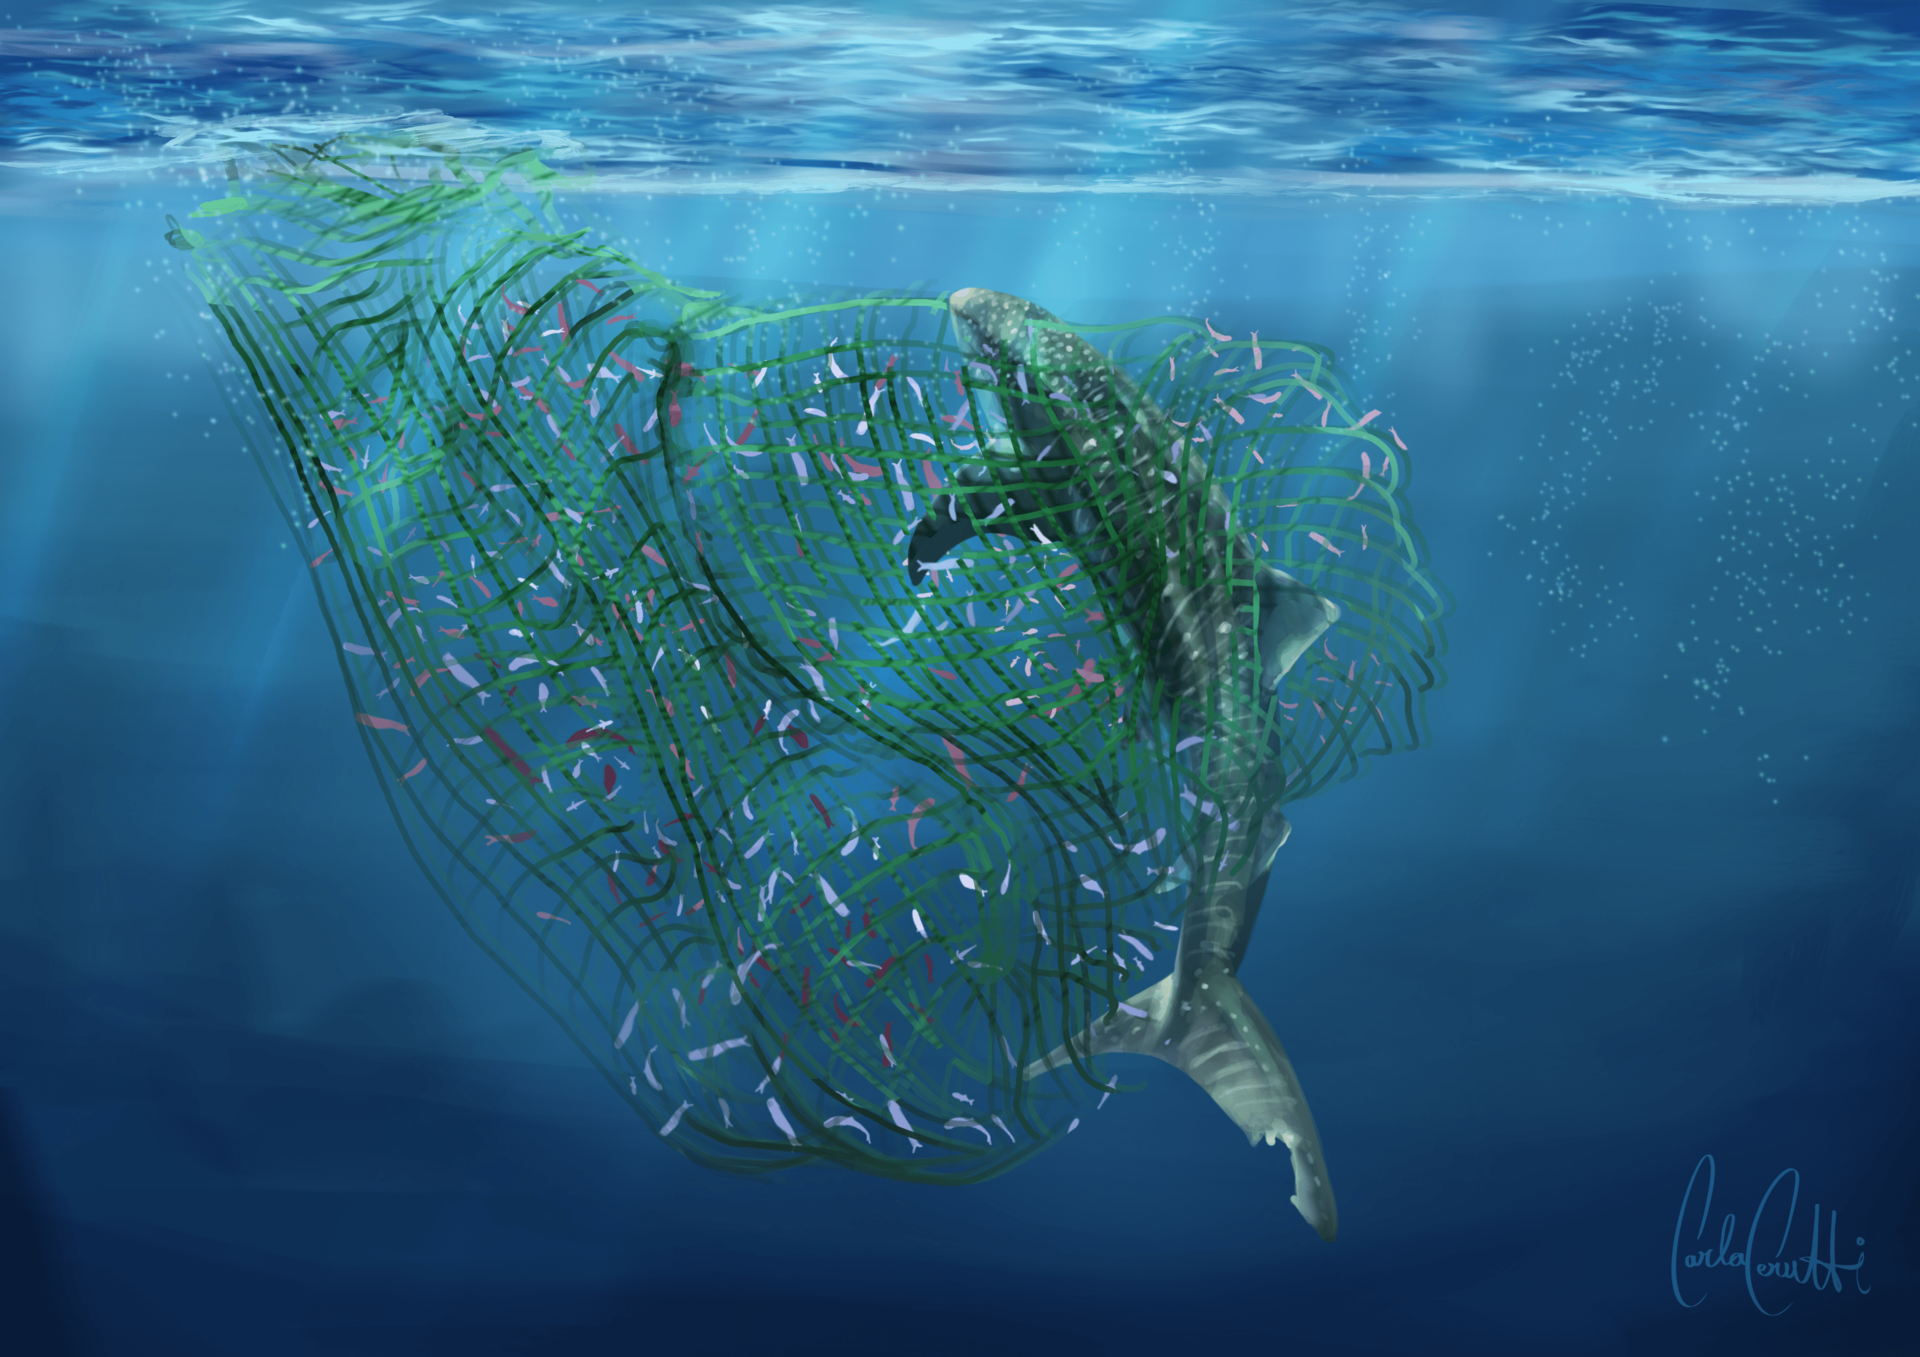 In a bluish sea, a large fish swims entwined in green fishing net.